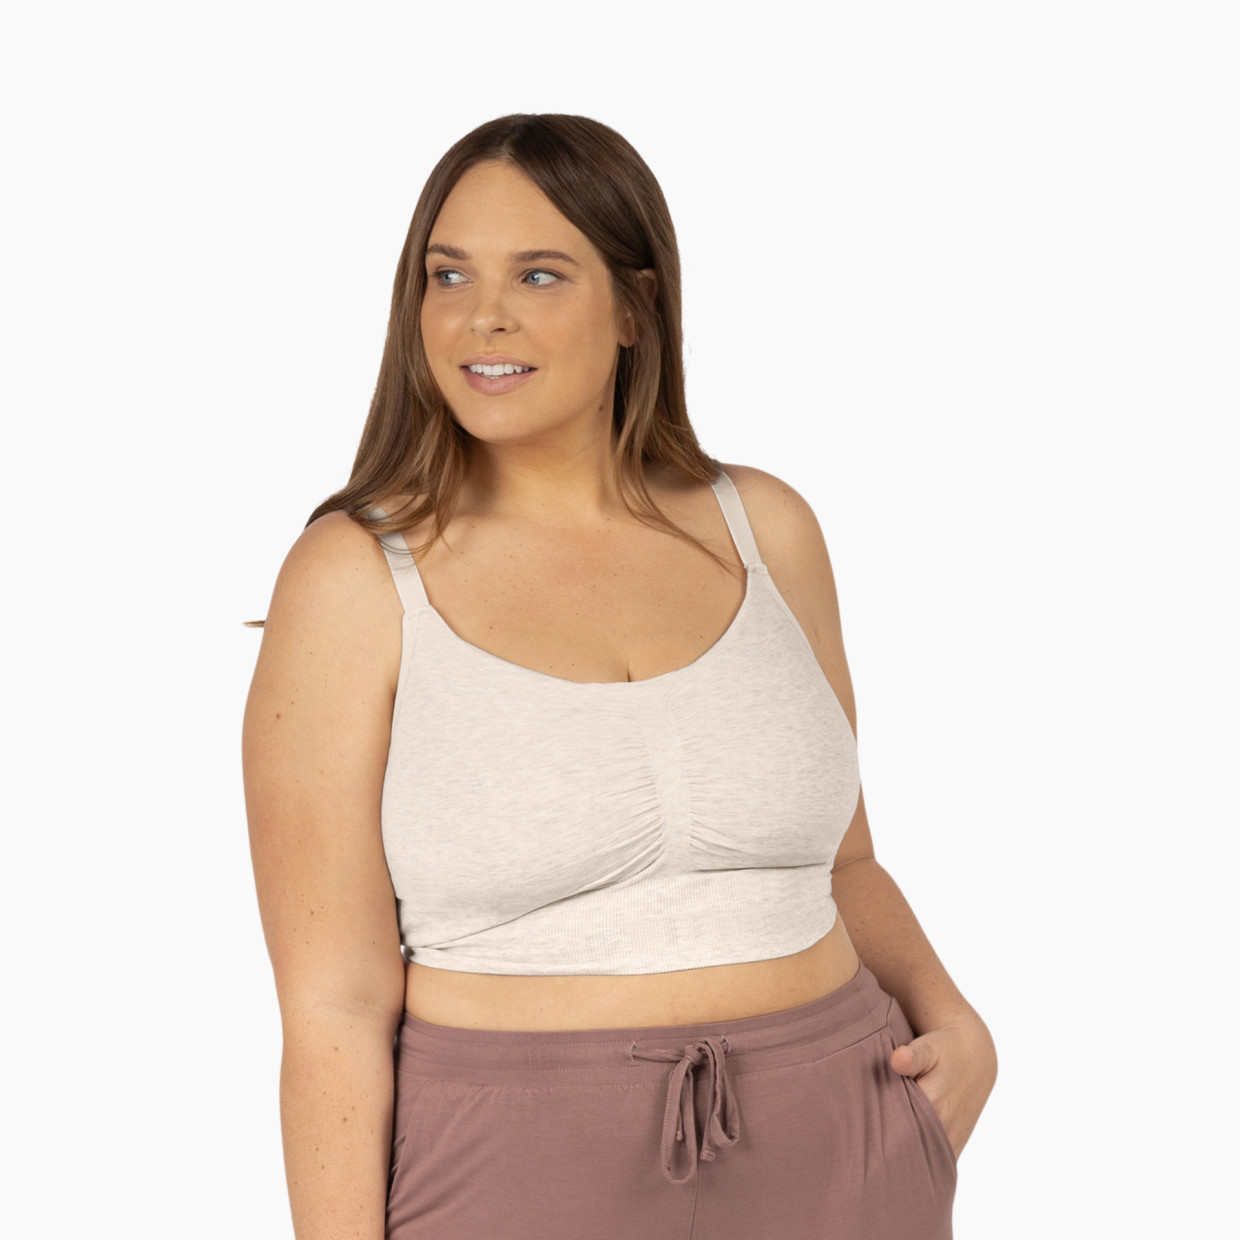 Kindred Bravely Sublime Bamboo Hands-Free Pumping Lounge & Sleep Bra - Oatmeal Heather, Xx-Large.